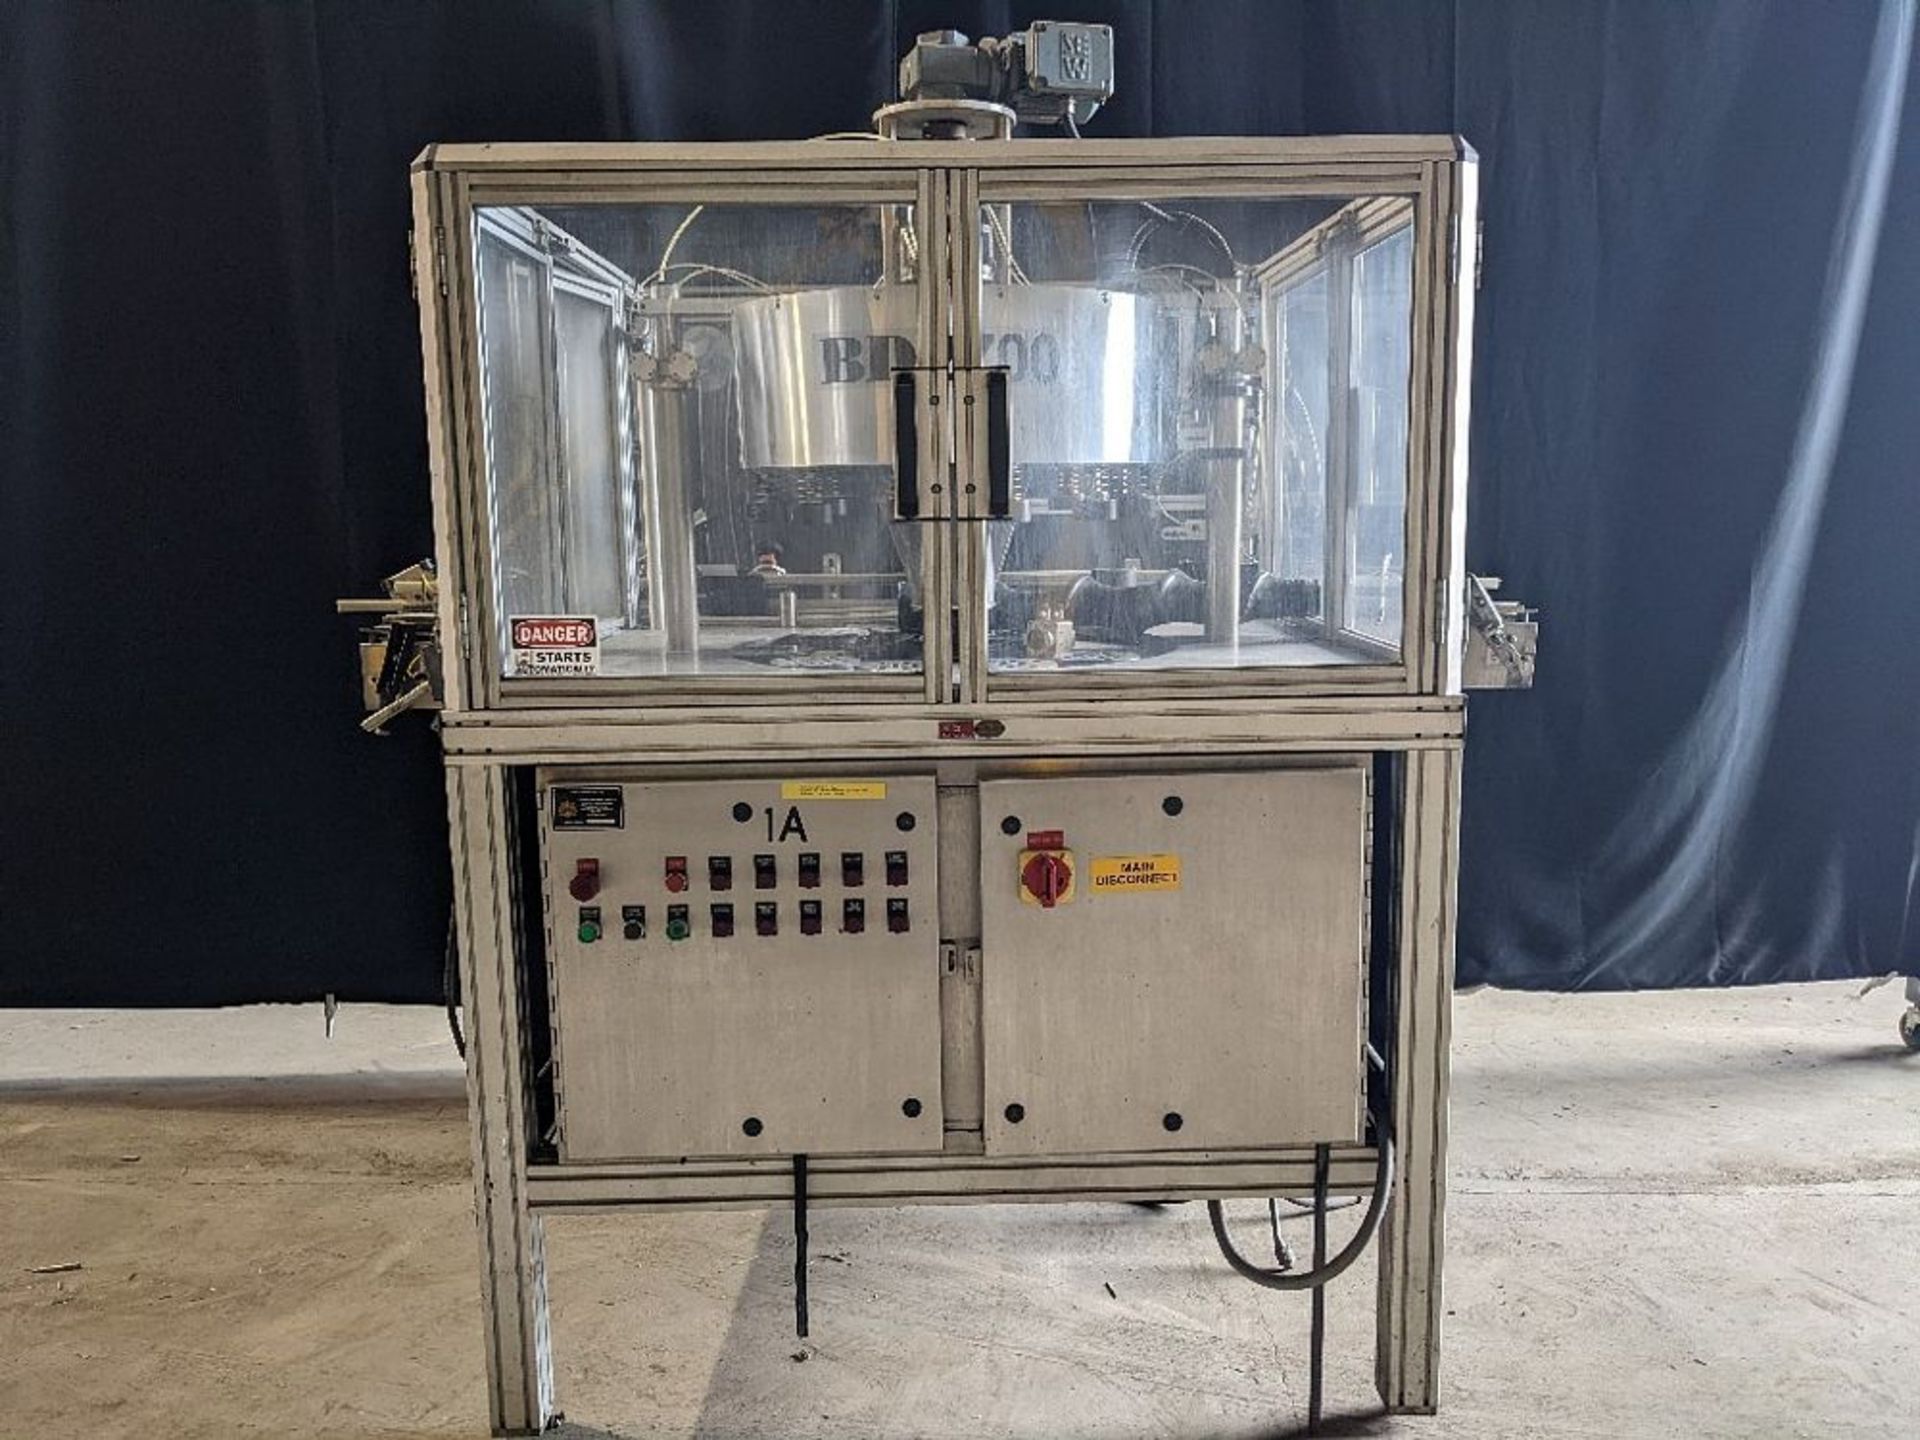 Qty (1) Bottling Development BD 2700 Rotary Secondary Bottle Orienter - 12 head rotary container